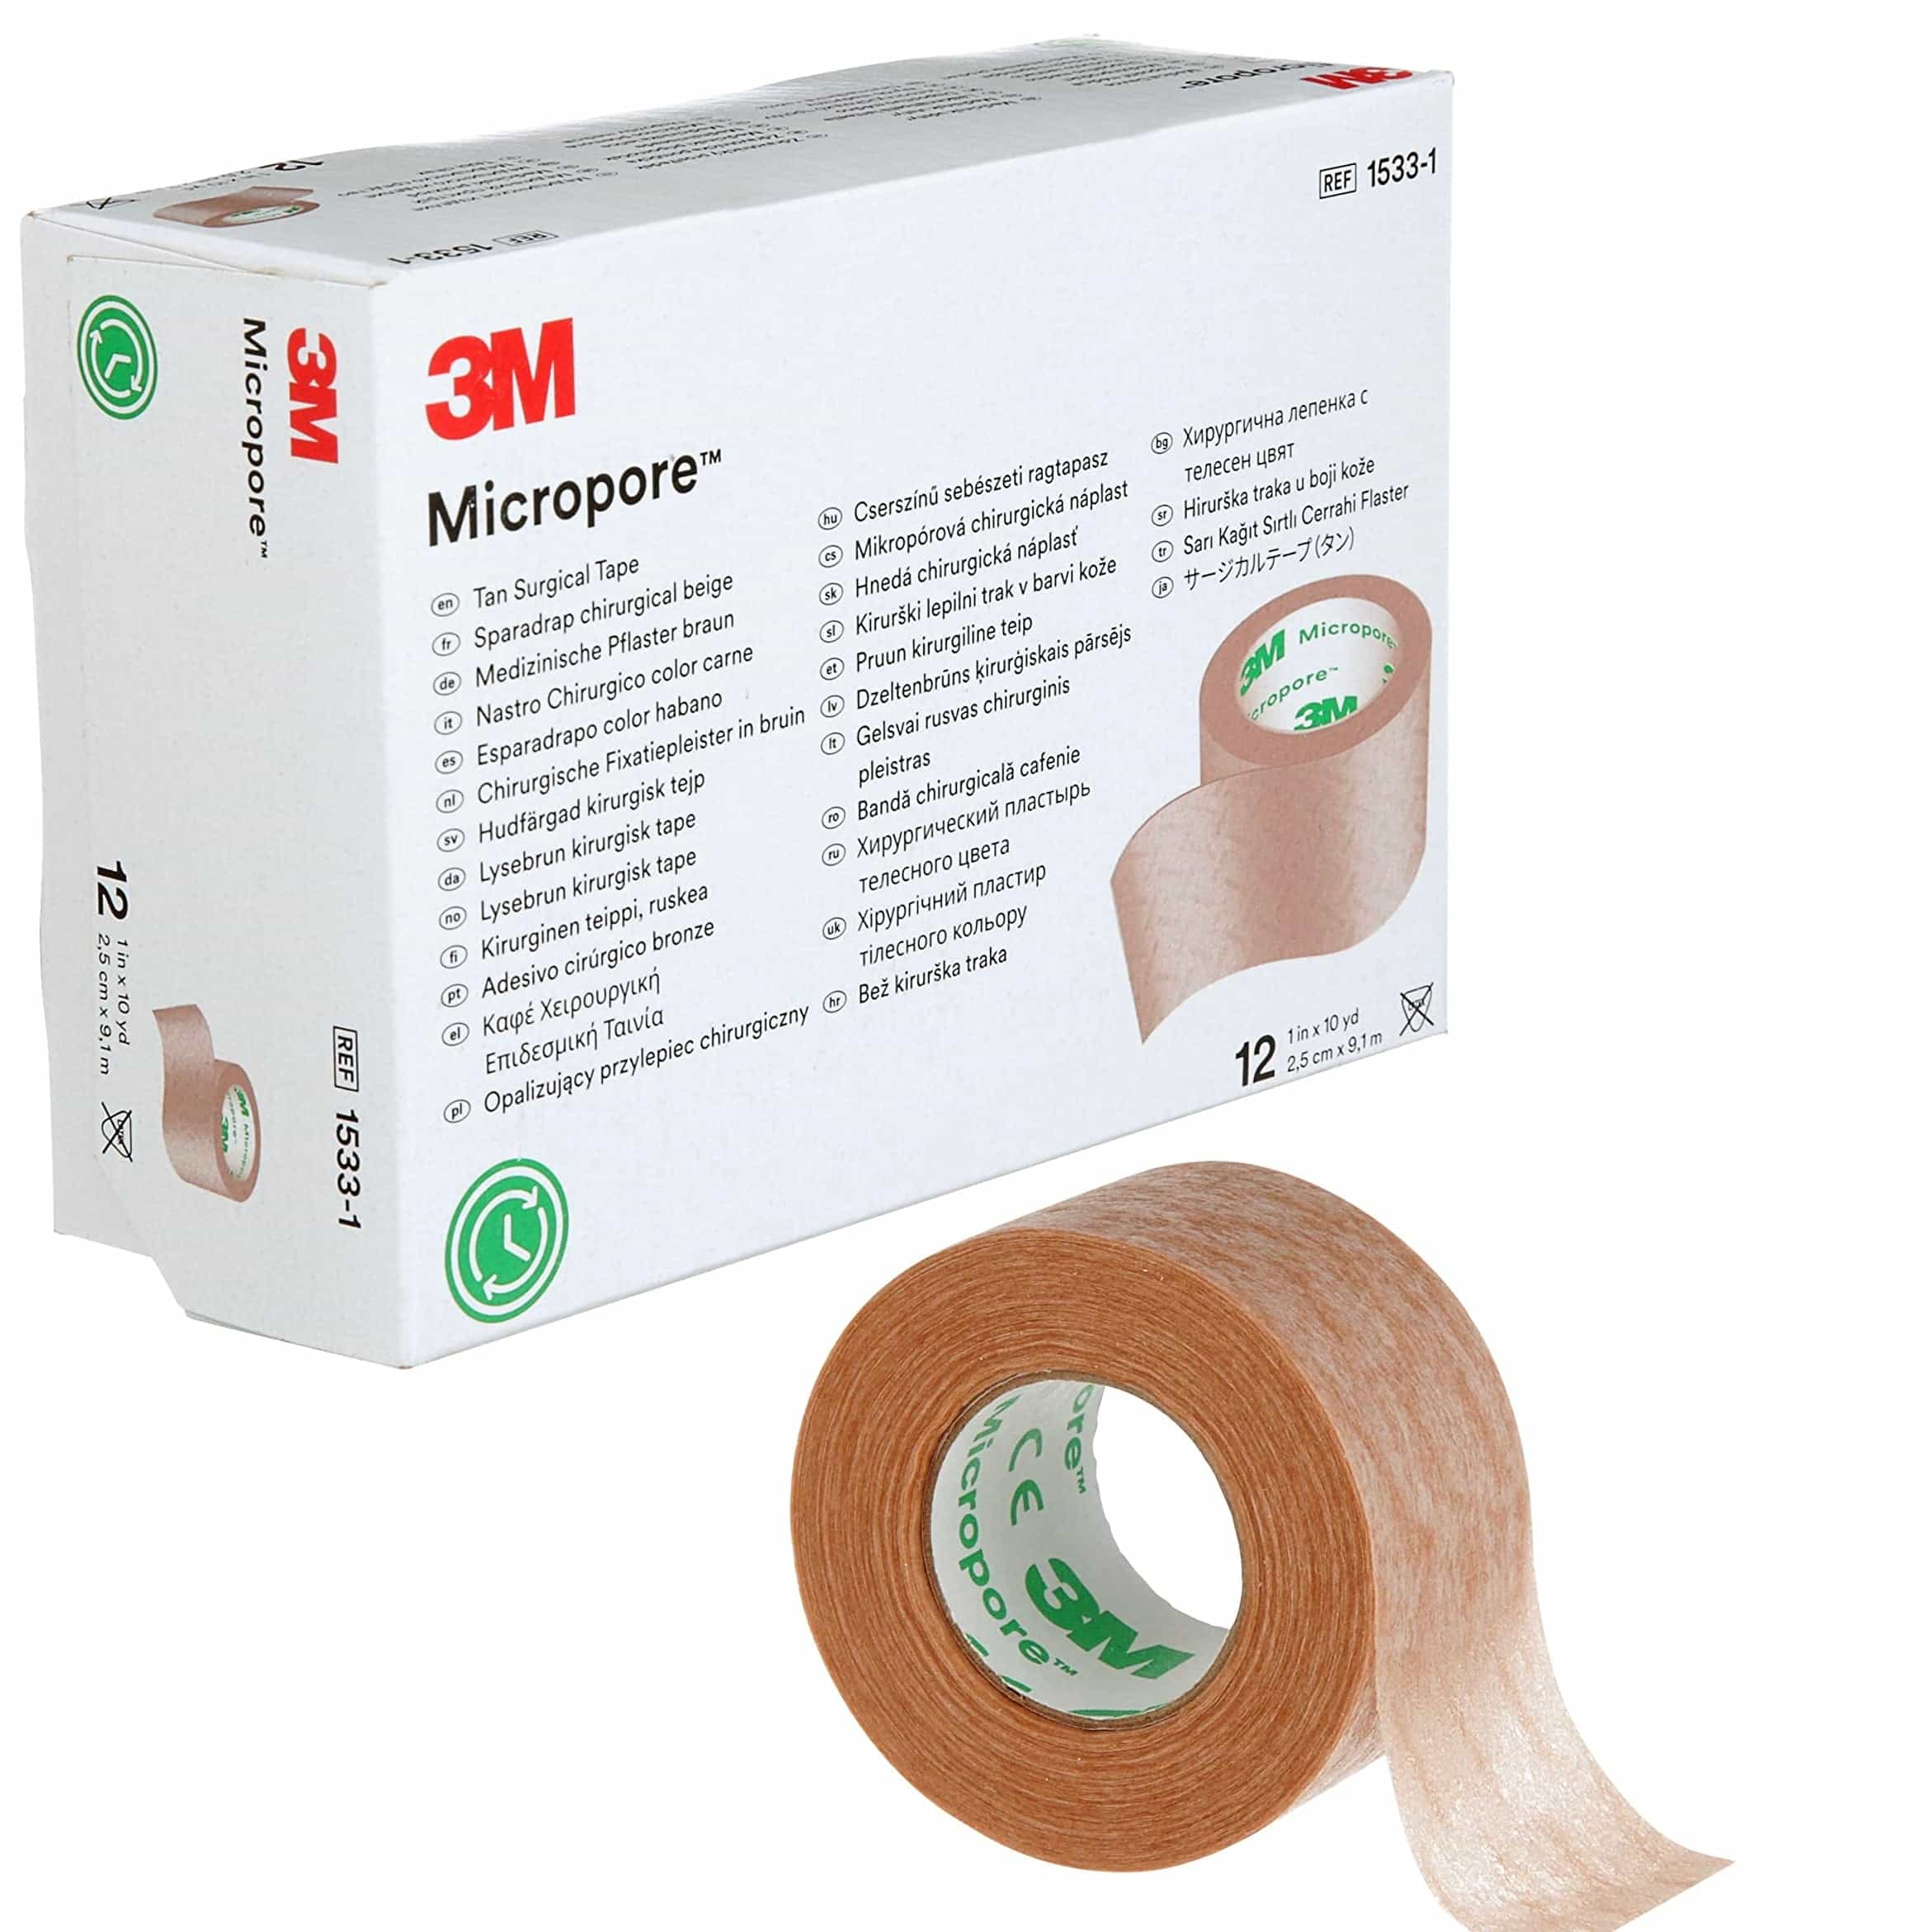 3M™ Micropore™ Medical Tape 1533-1, a hypoallergenic and breathable tape, ideal for securing dressings and devices on sensitive skin, available in Canada.